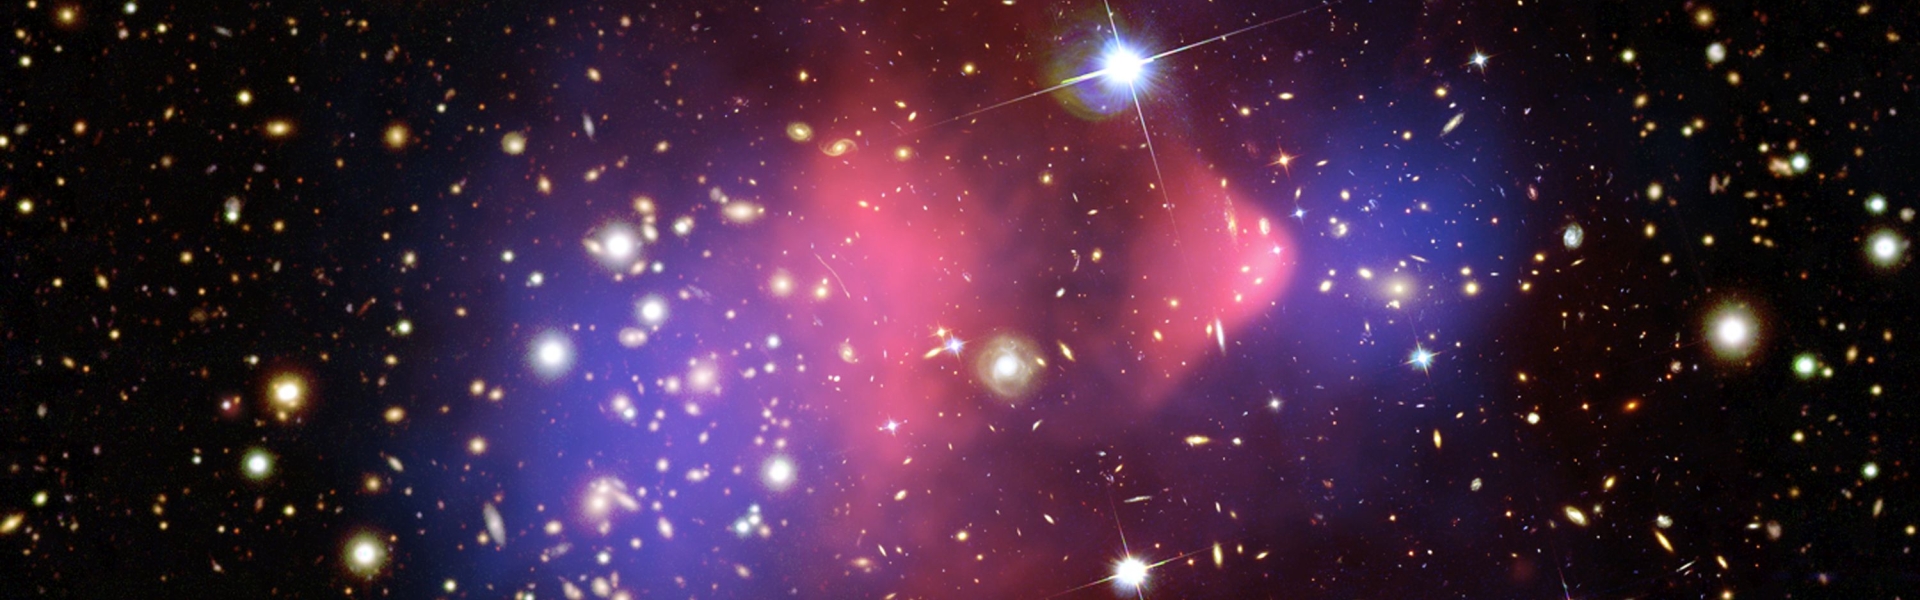 Cosmology with galaxy clusters